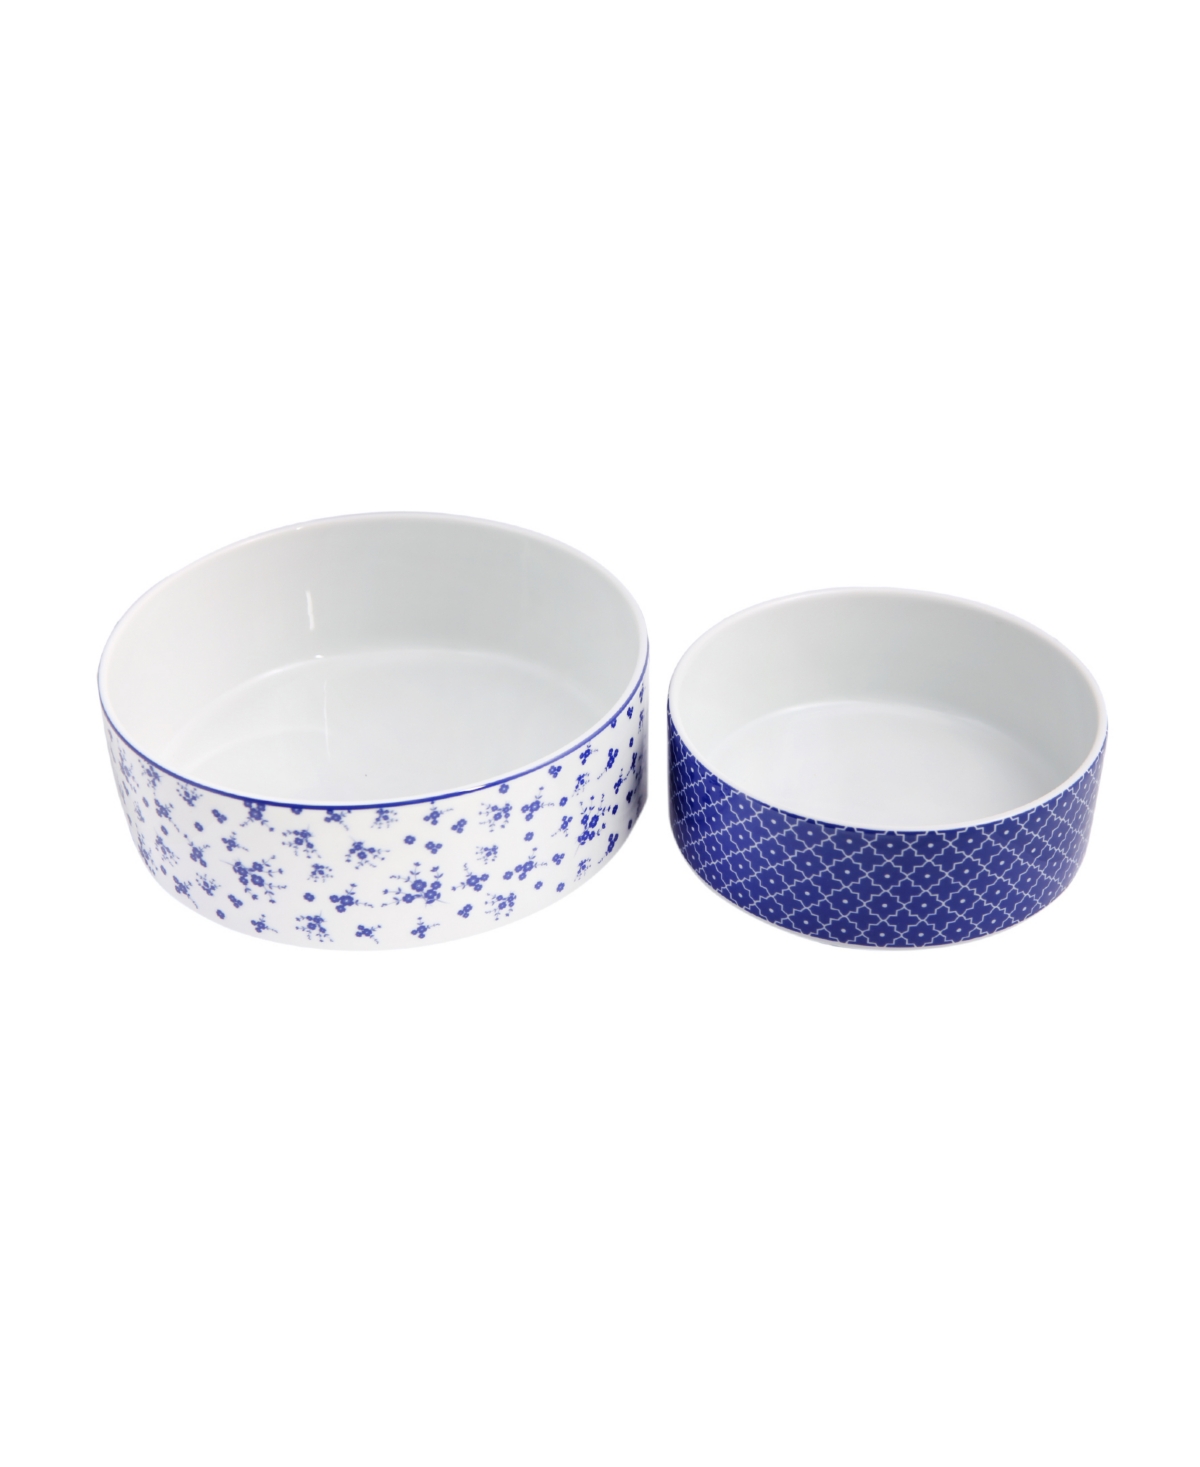 Blue Passion 2-Piece Oven Dish Set - Blue and White